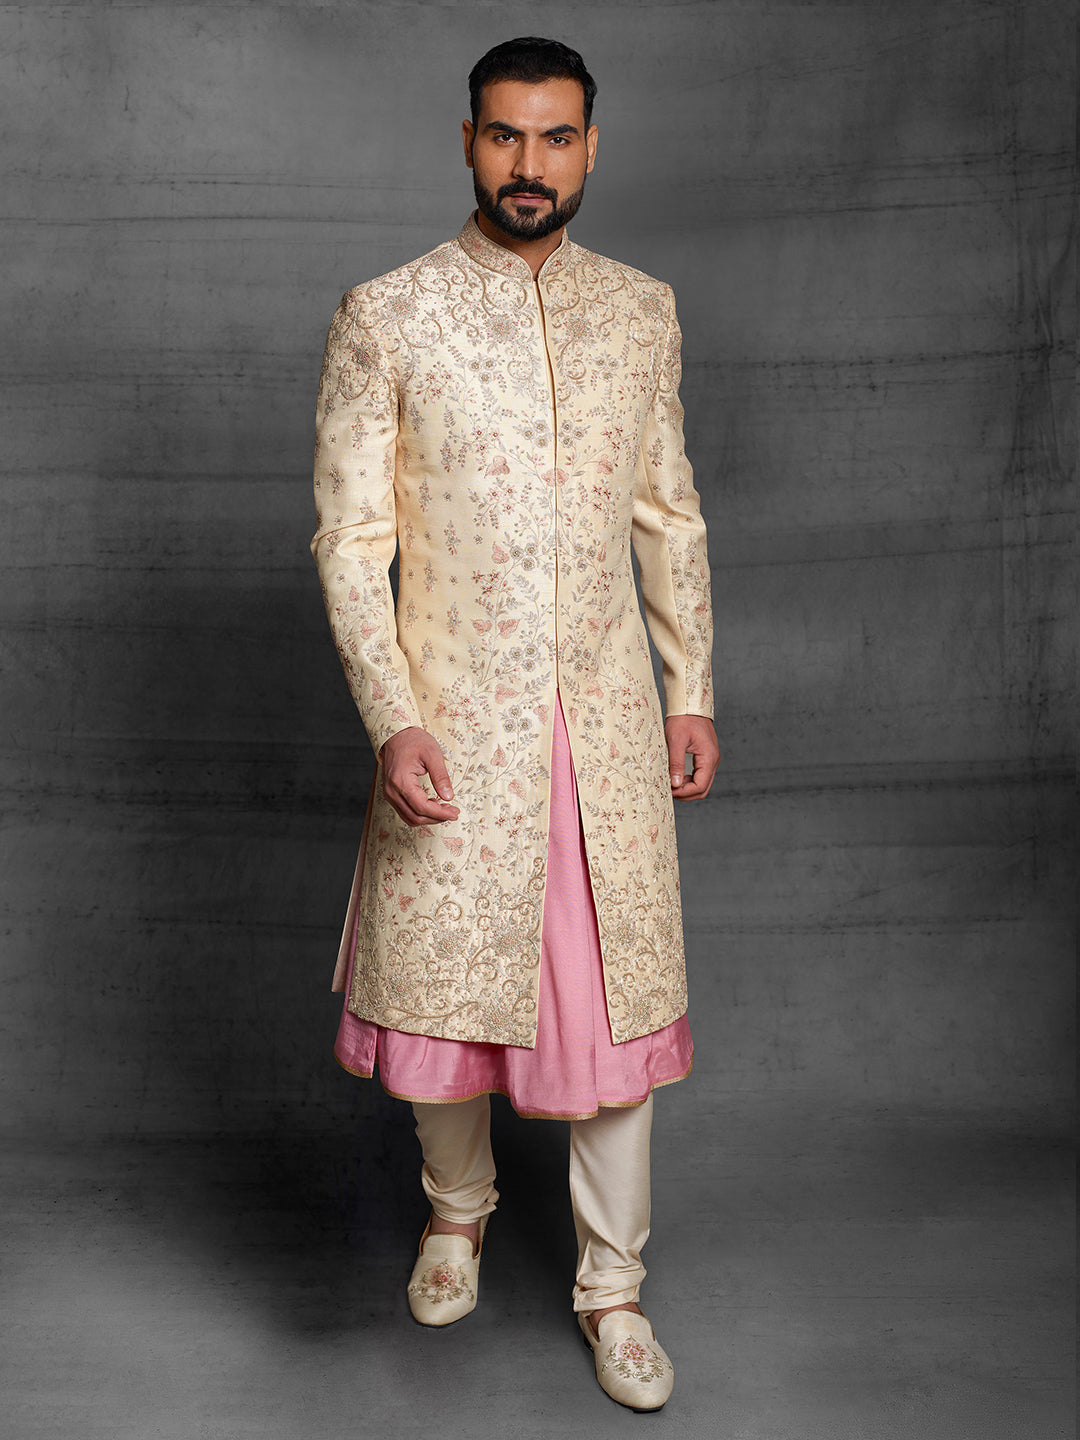 Gold groom's wear sherwani with pink highlights.